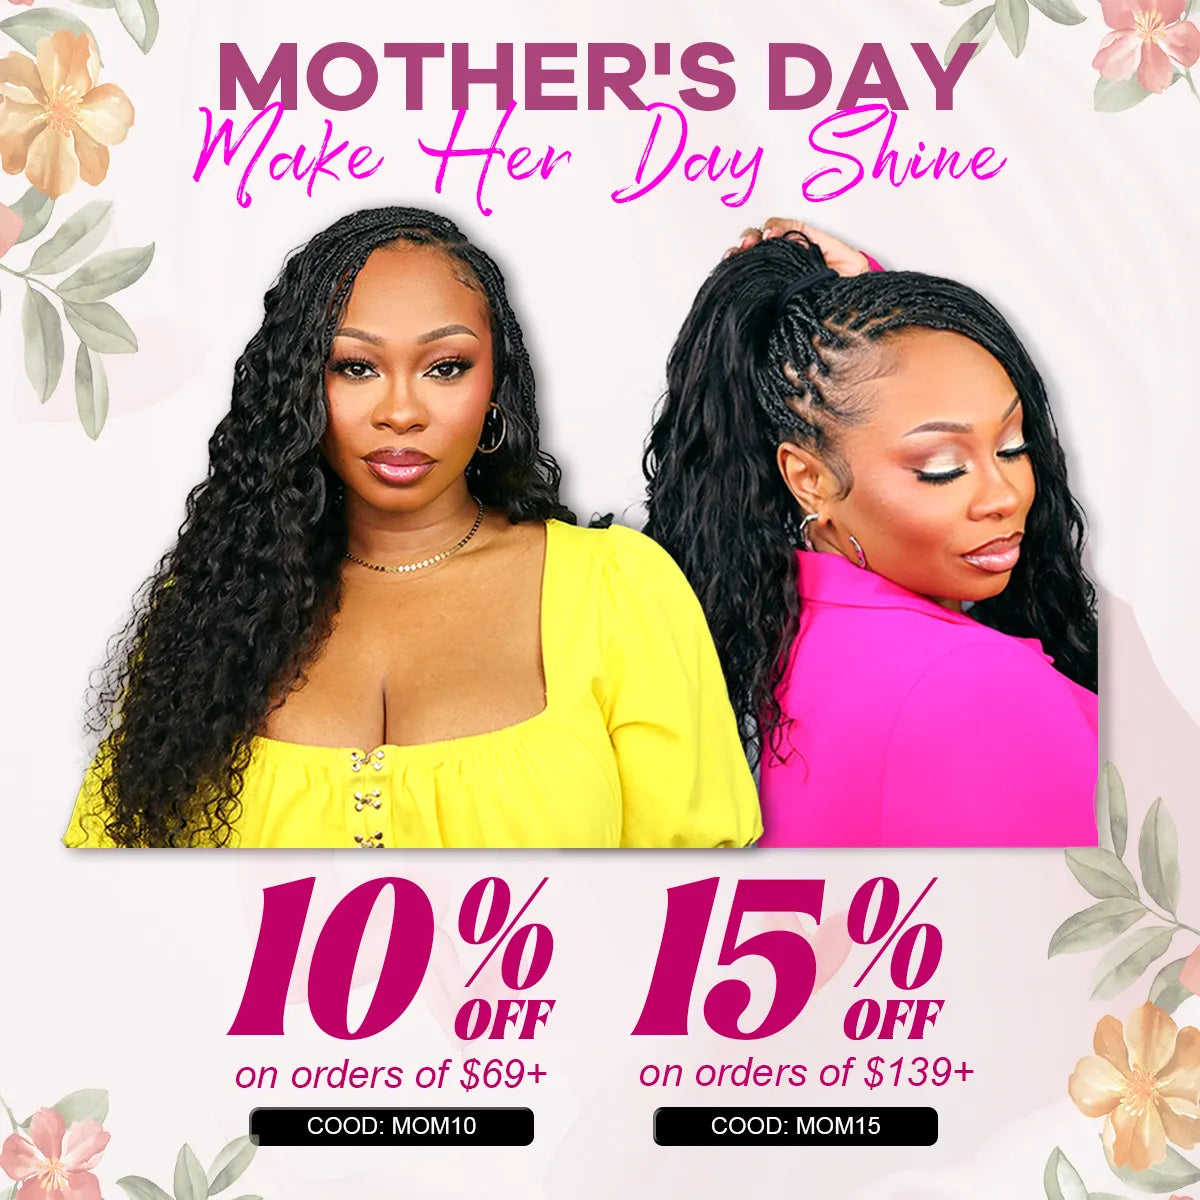 Get Ready for Mother's Day Sale